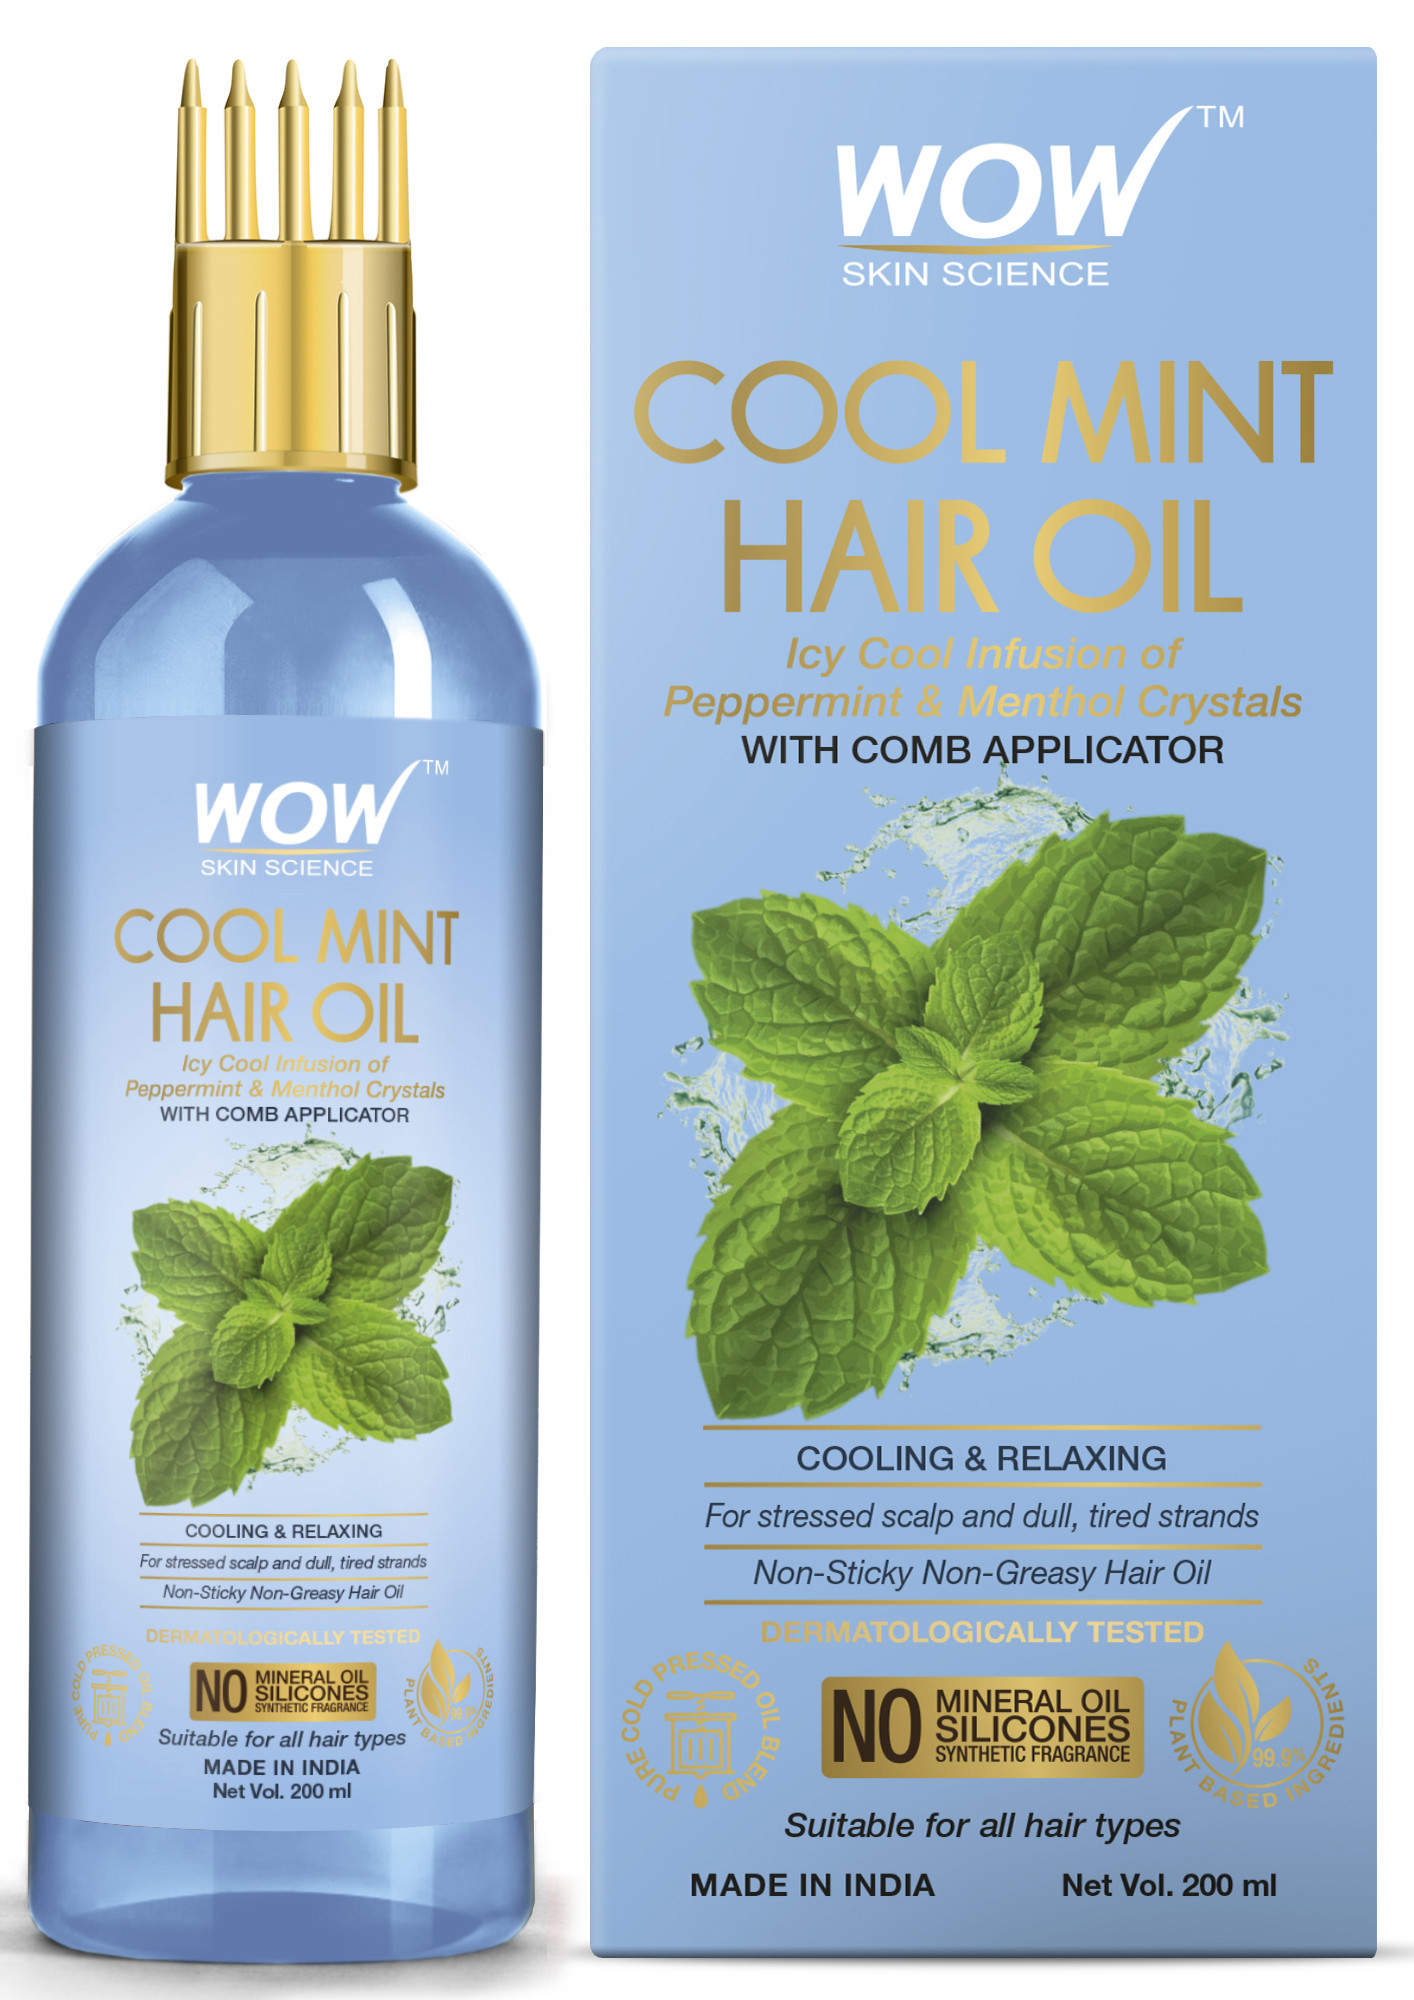 WOW Skin Science Cool Mint Hair Oil - with Comb Applicator - Non Sticky & Non Greasy - for All Hair Types - No Mineral Oil, Silicones, Synthetic Fragrance - 200mL